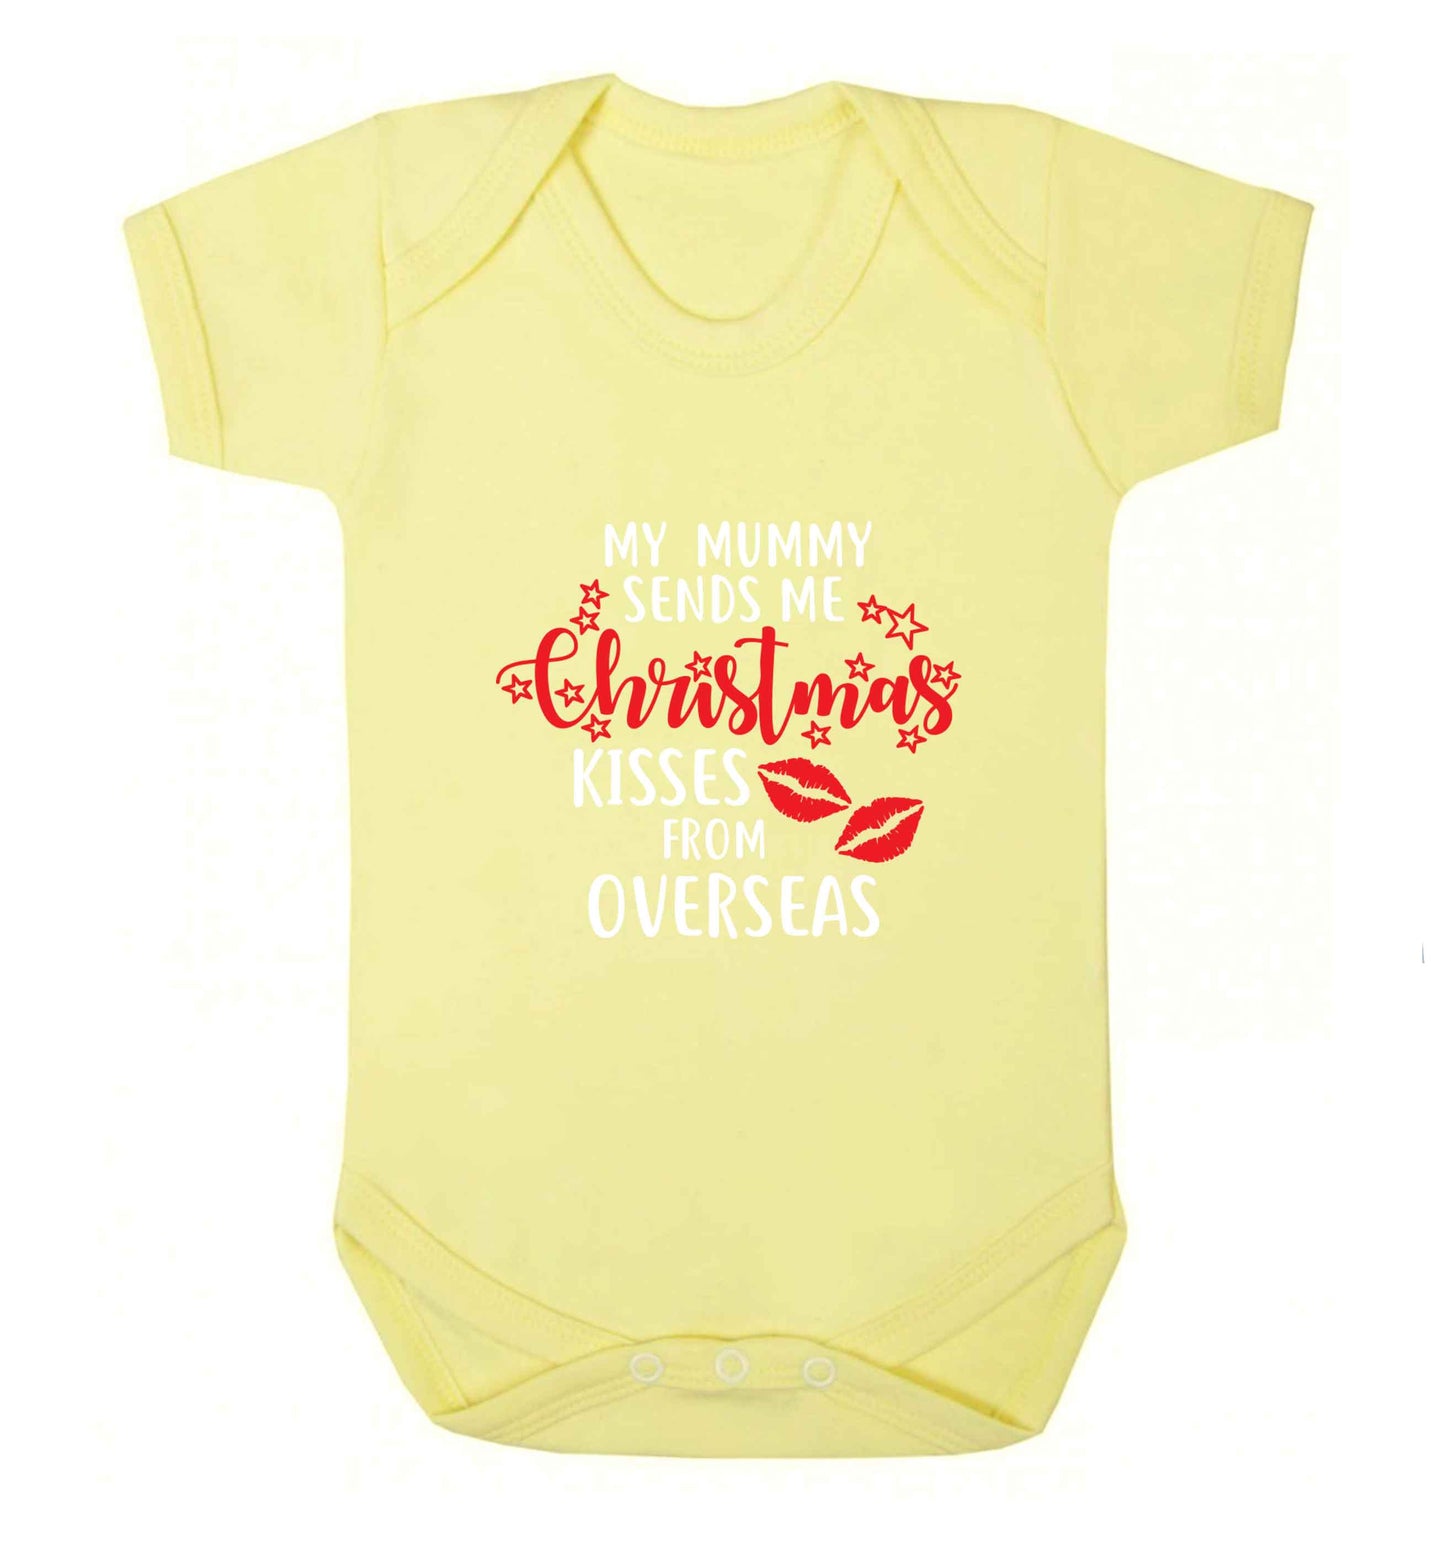 Mummy Christmas Kisses Overseas baby vest pale yellow 18-24 months